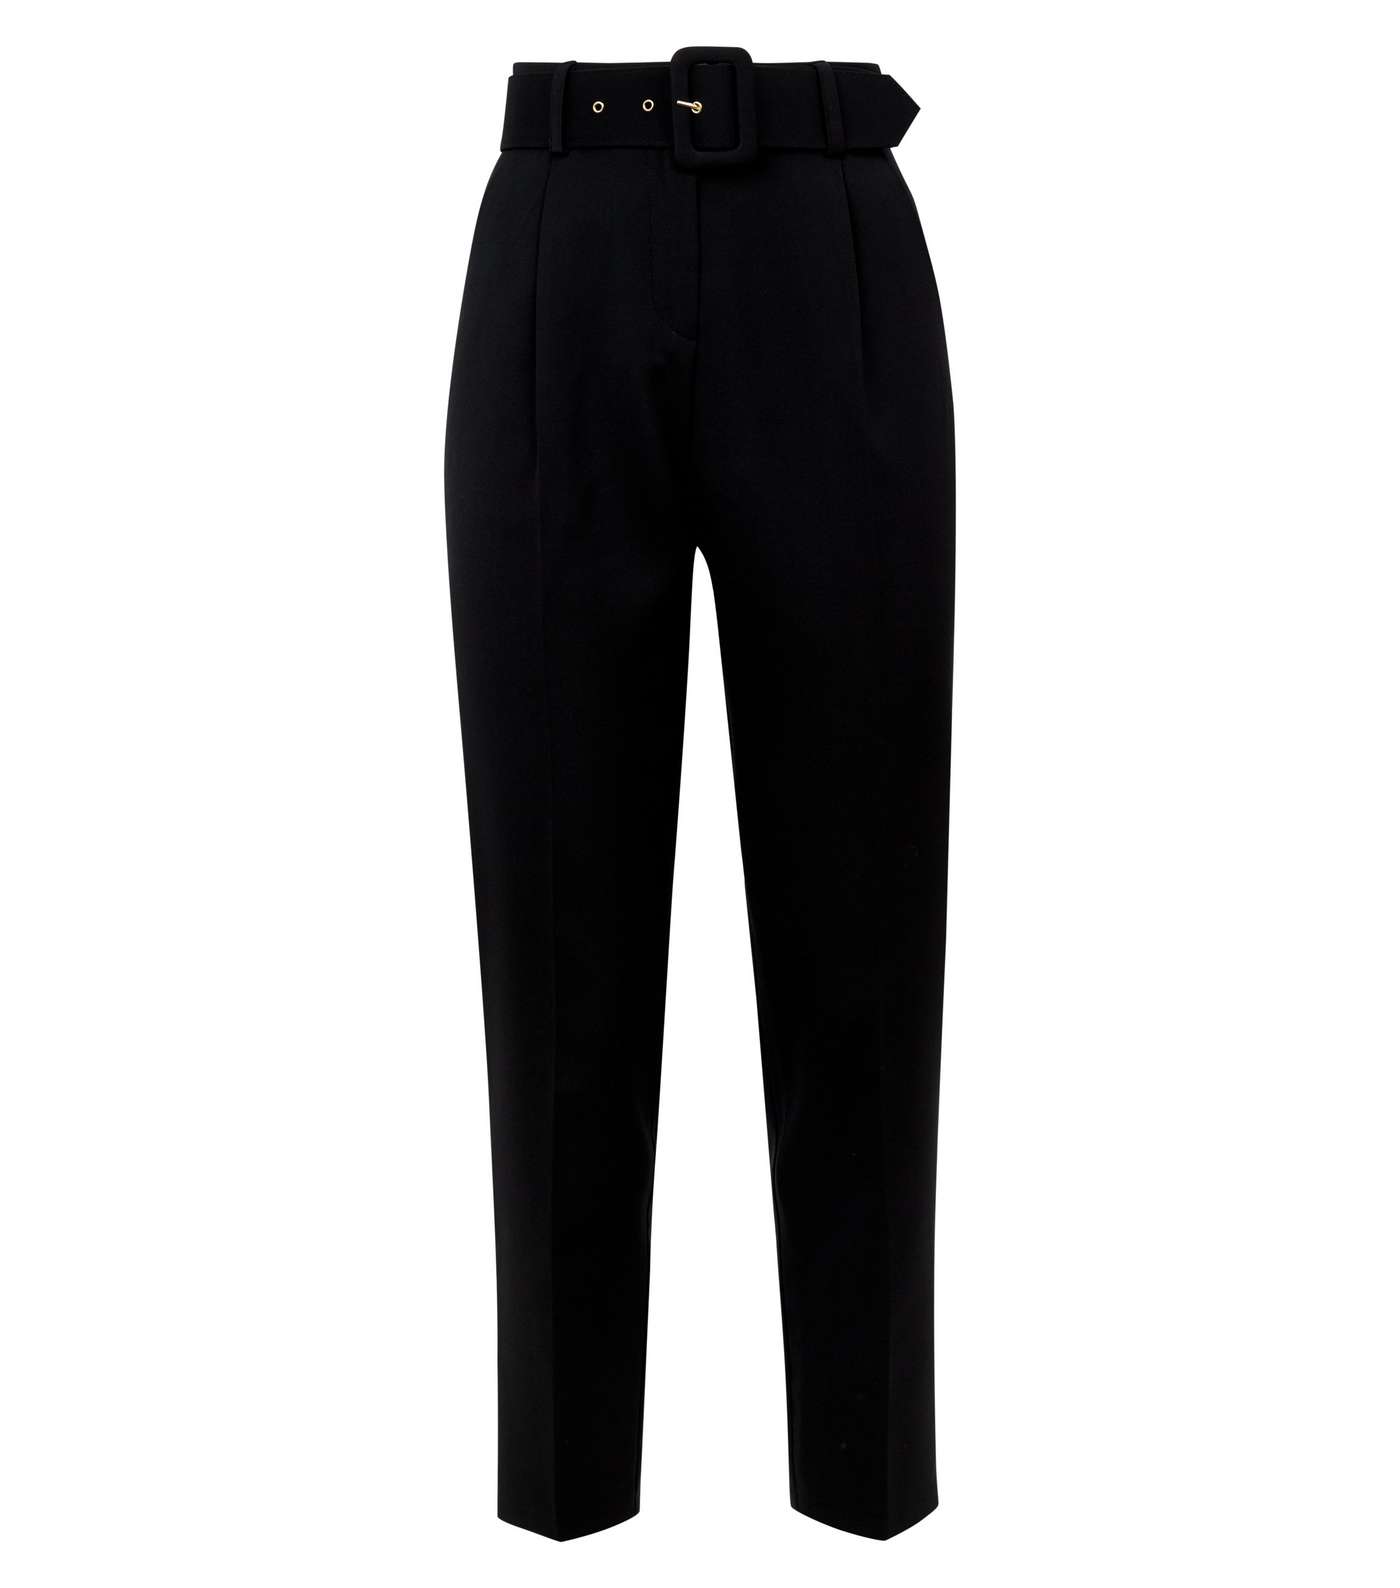 Cameo Black Belted Slim Leg Trousers Image 4